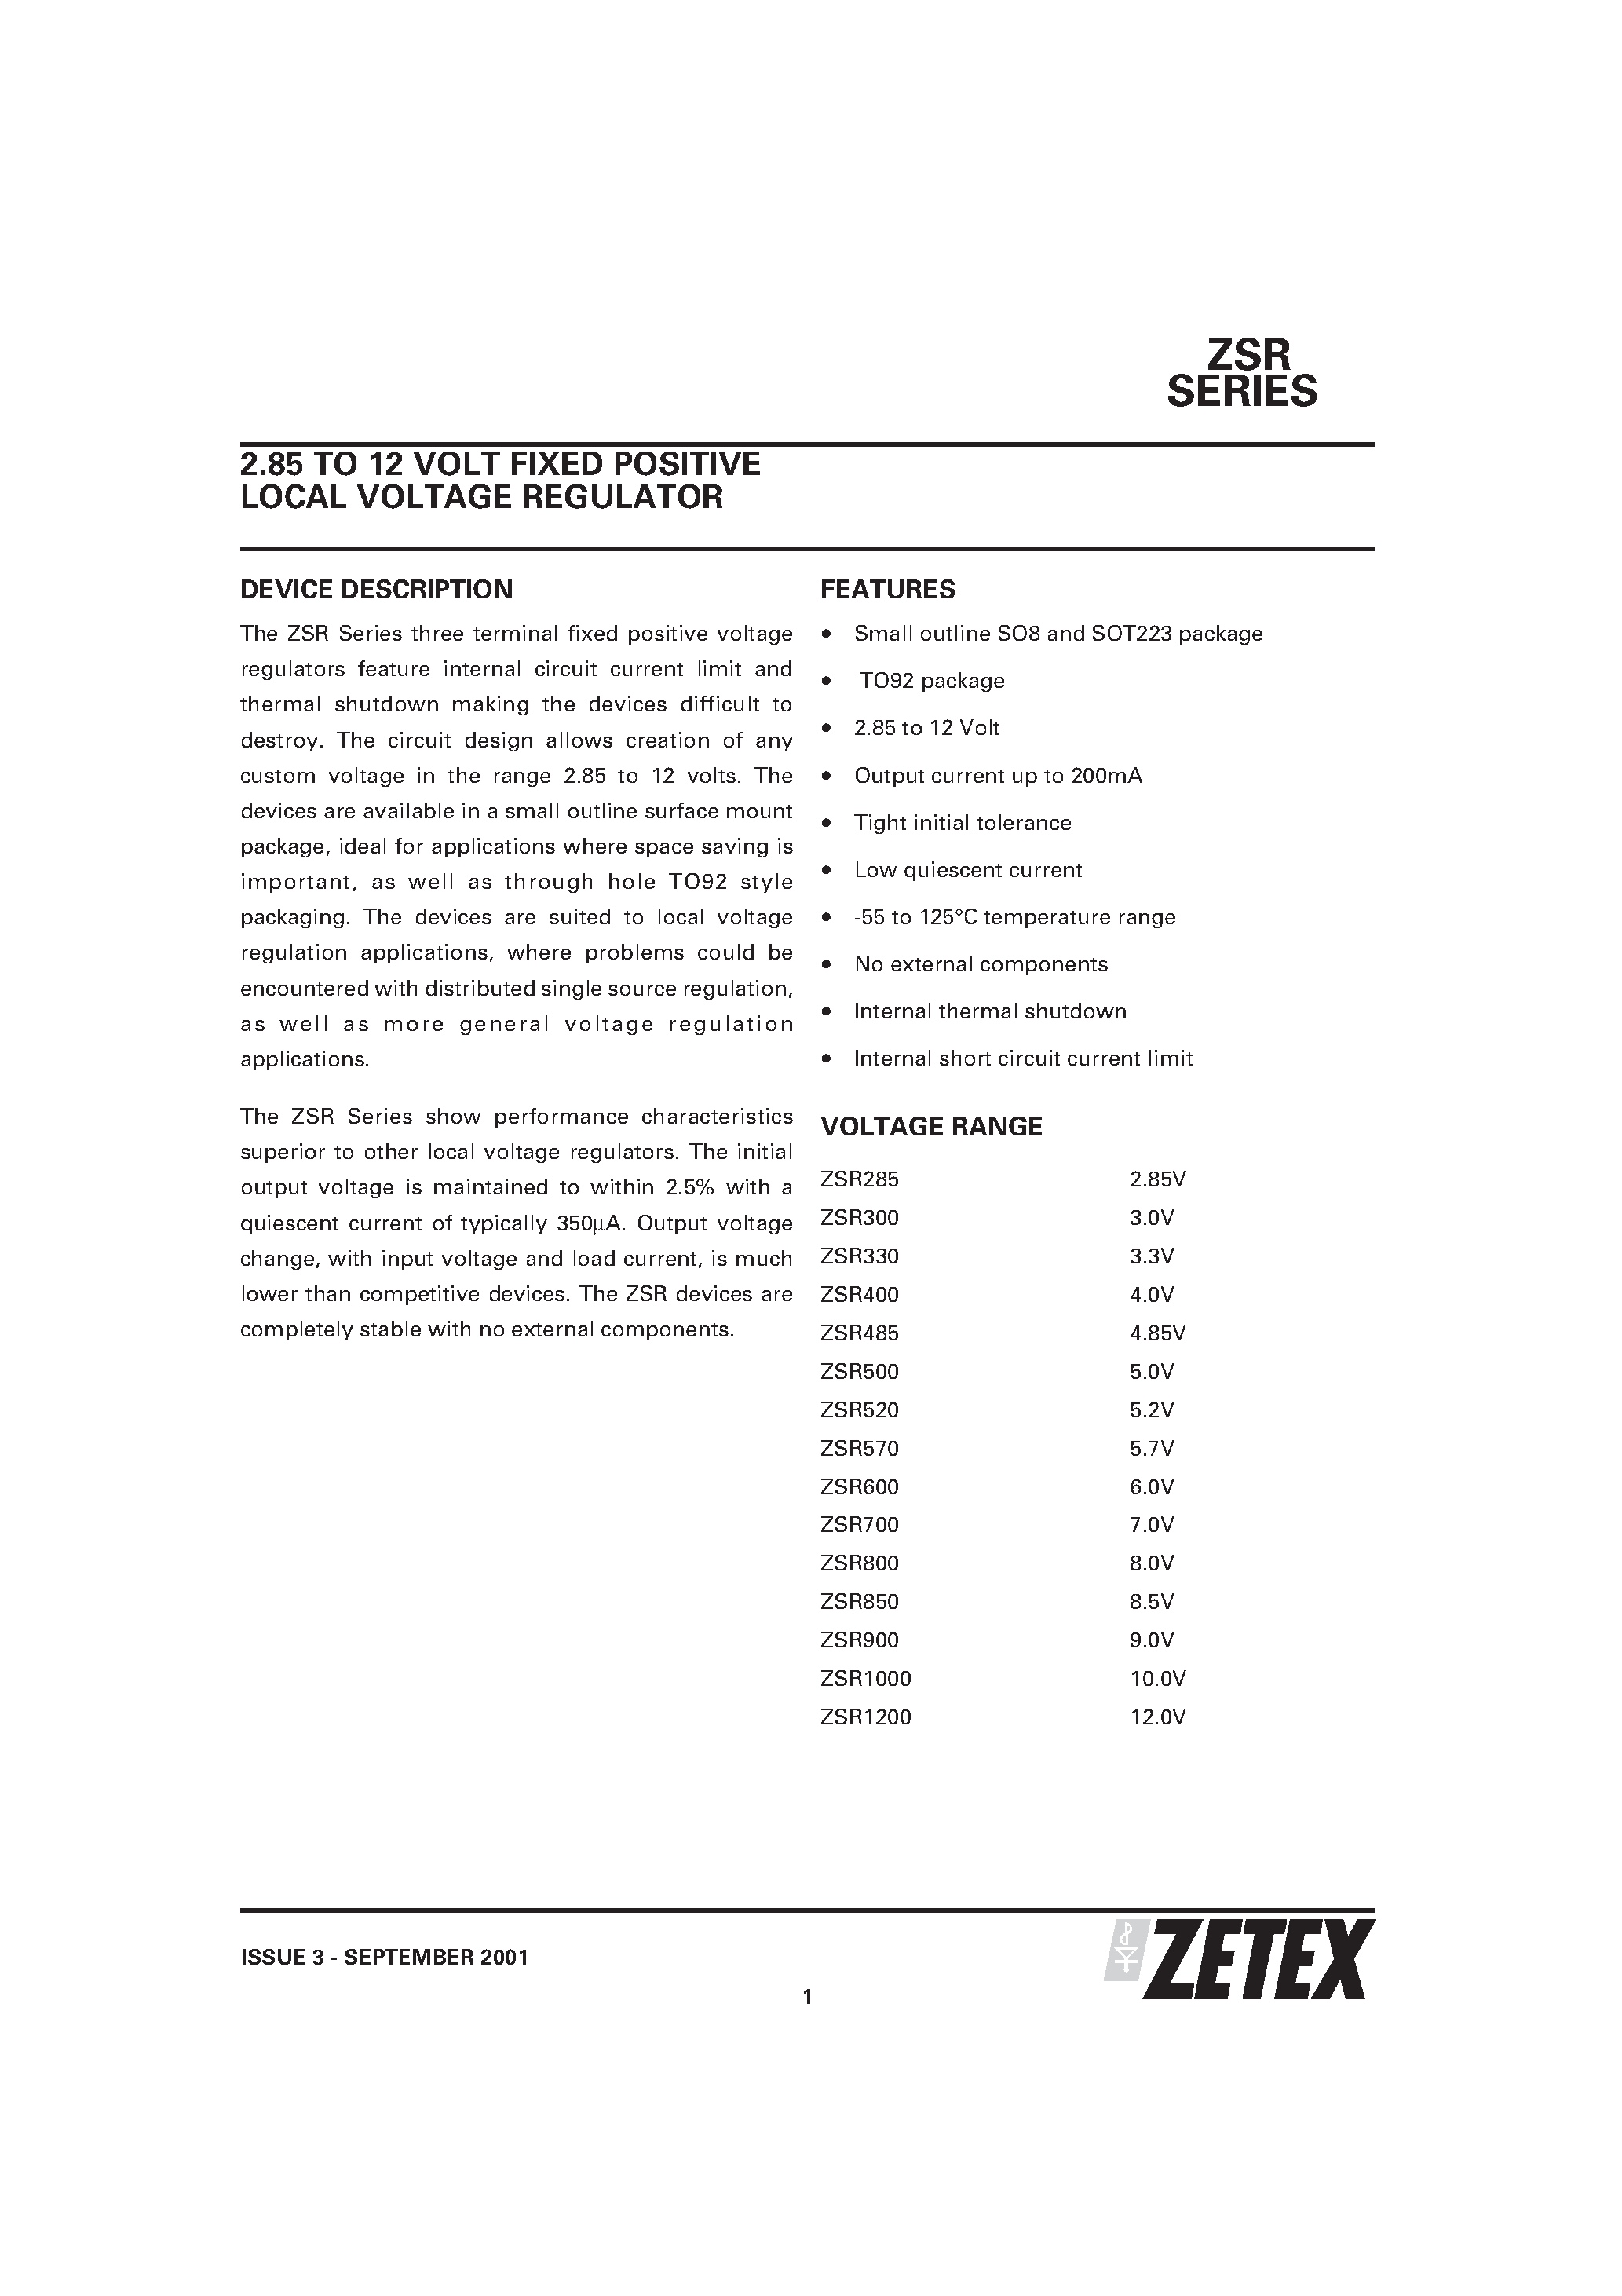 Datasheet ZSR600 - 2.85 TO 12 VOLT FIXED POSITIVE LOCAL VOLTAGE REGULATOR page 1